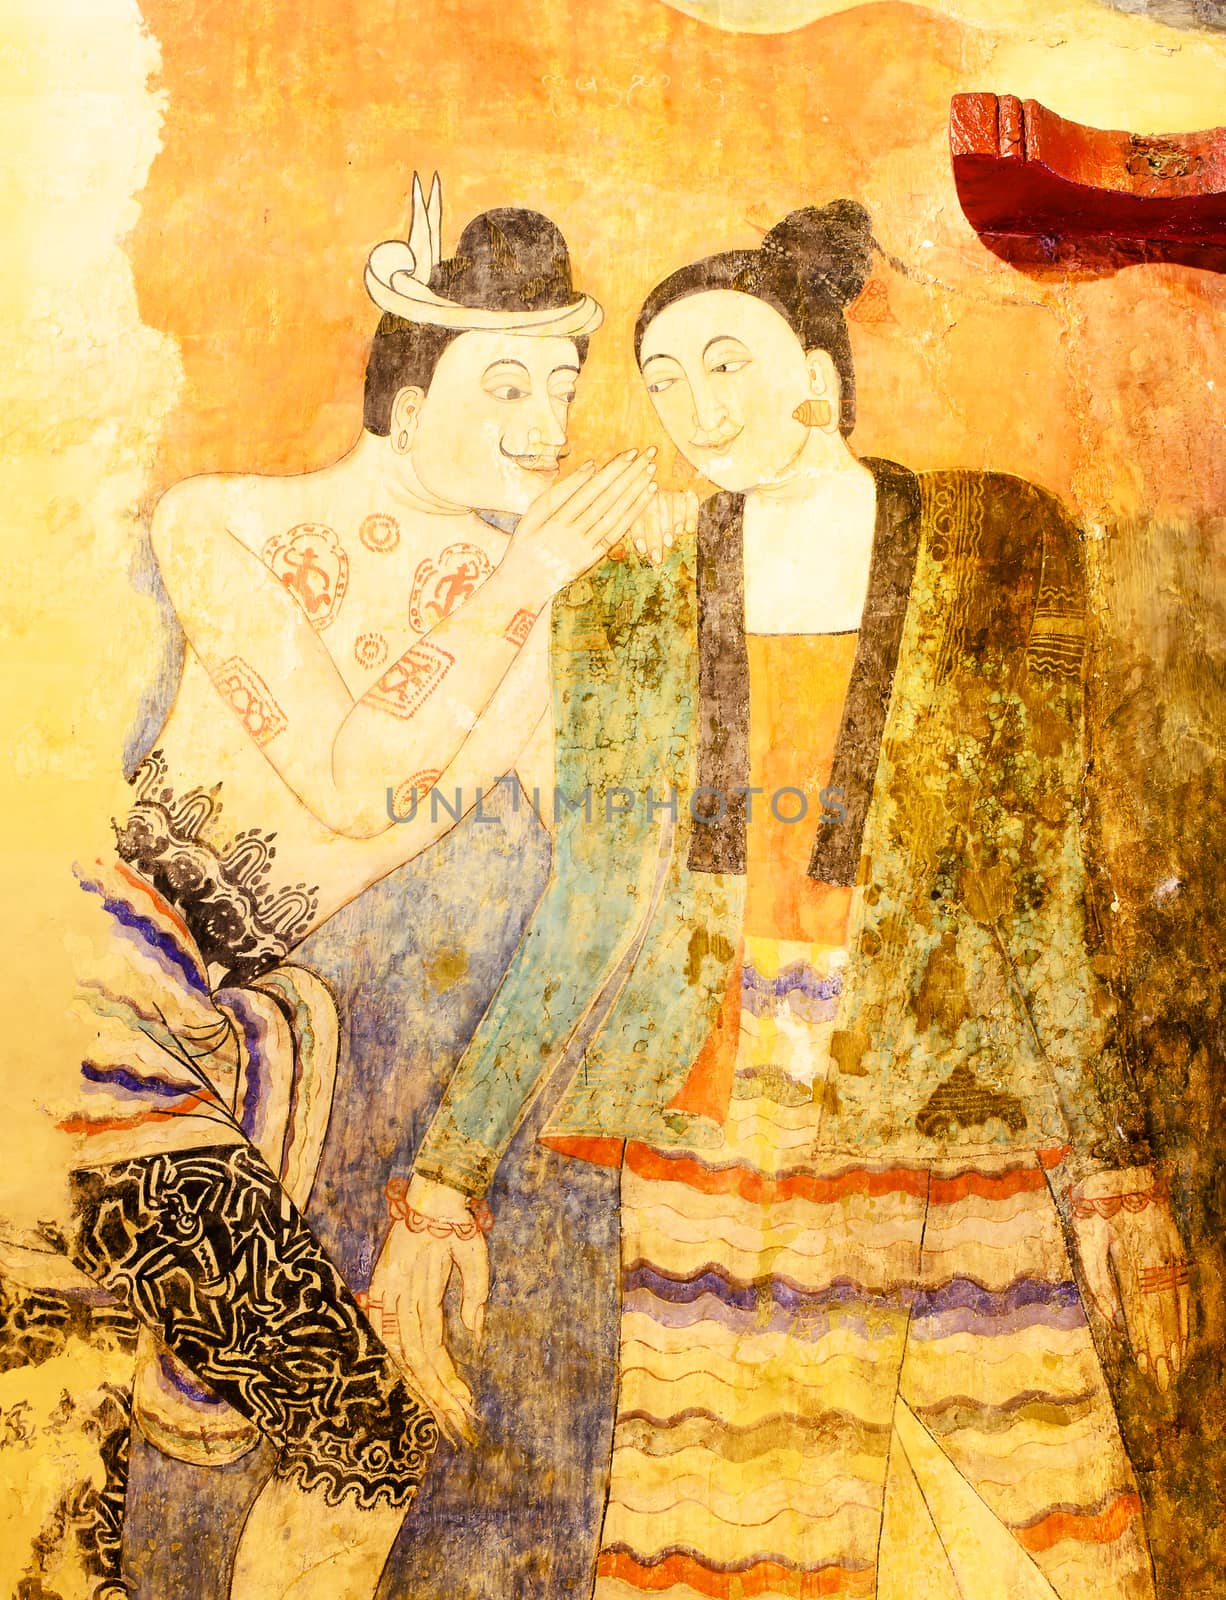 The Whisper of Ancient Painting Wall Art in Temple.